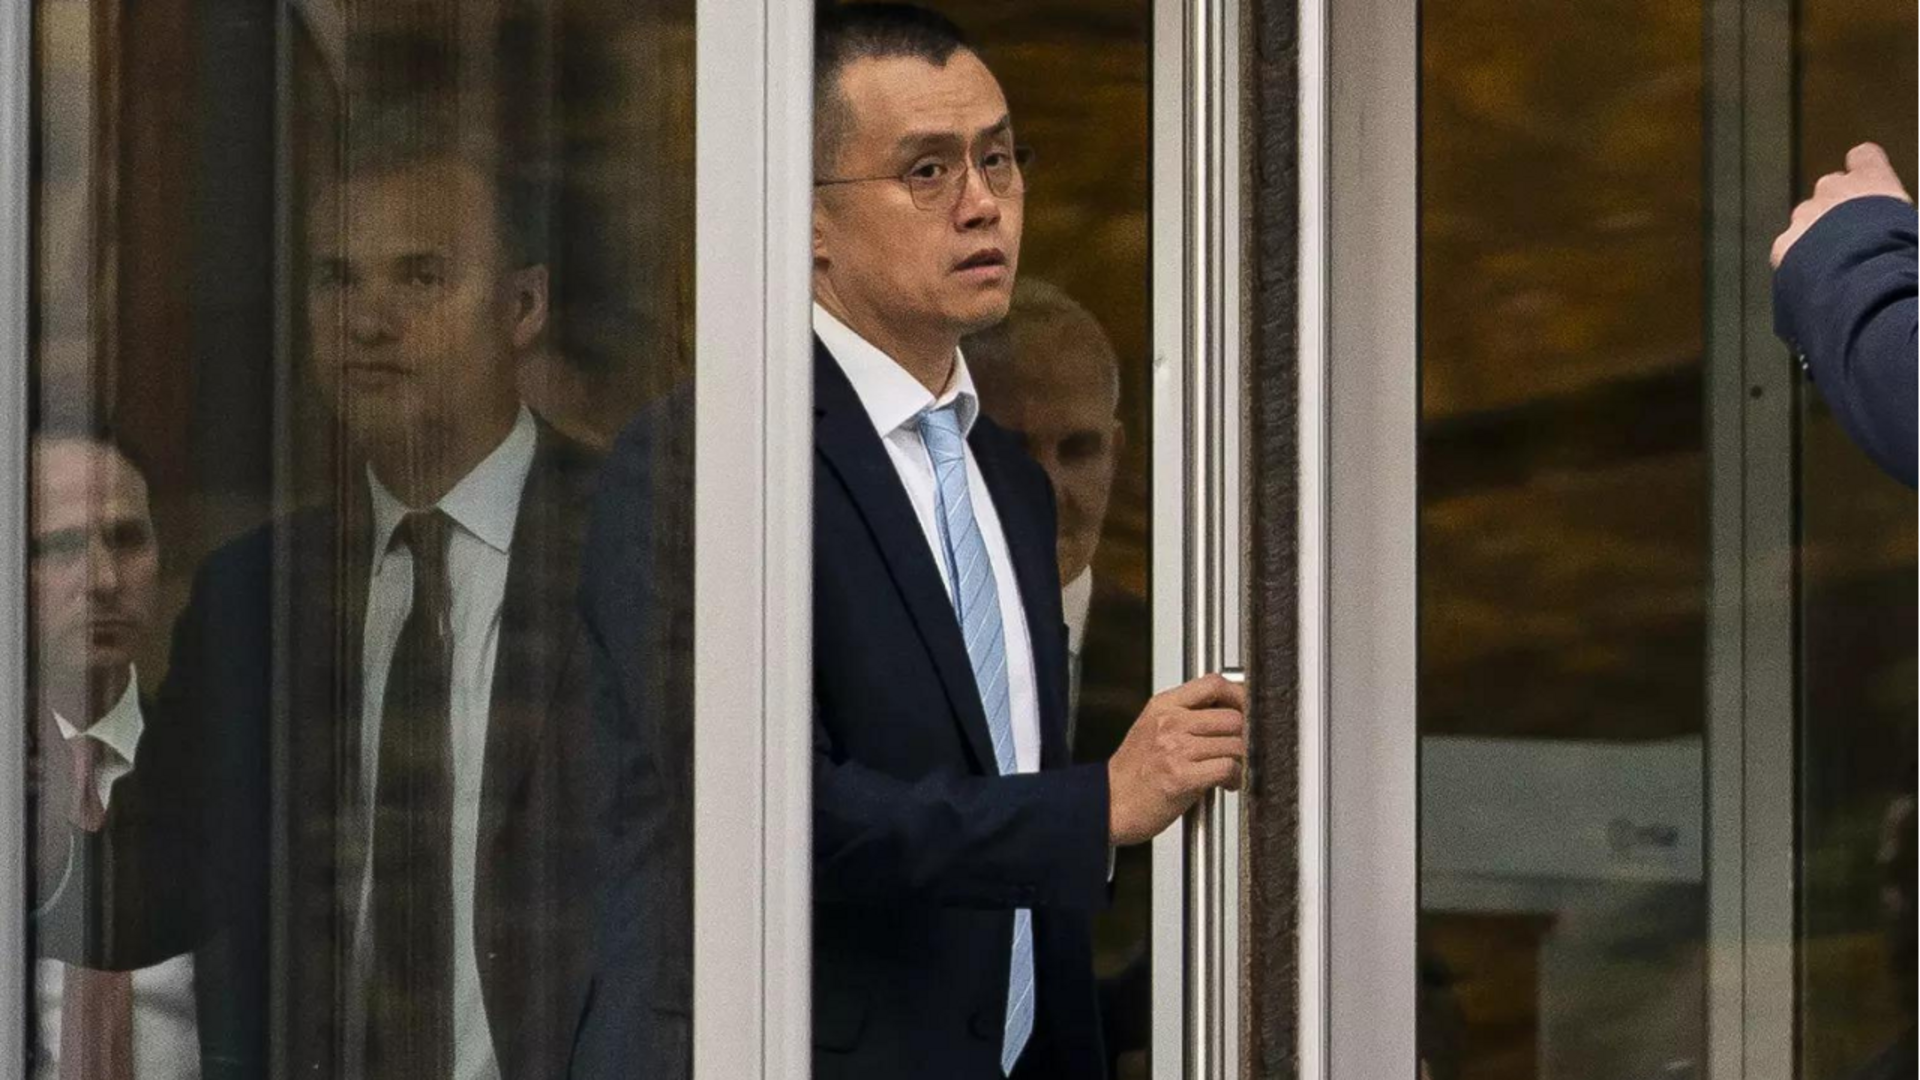 Crypto kingpin pleads guilty: The case against Binance founder